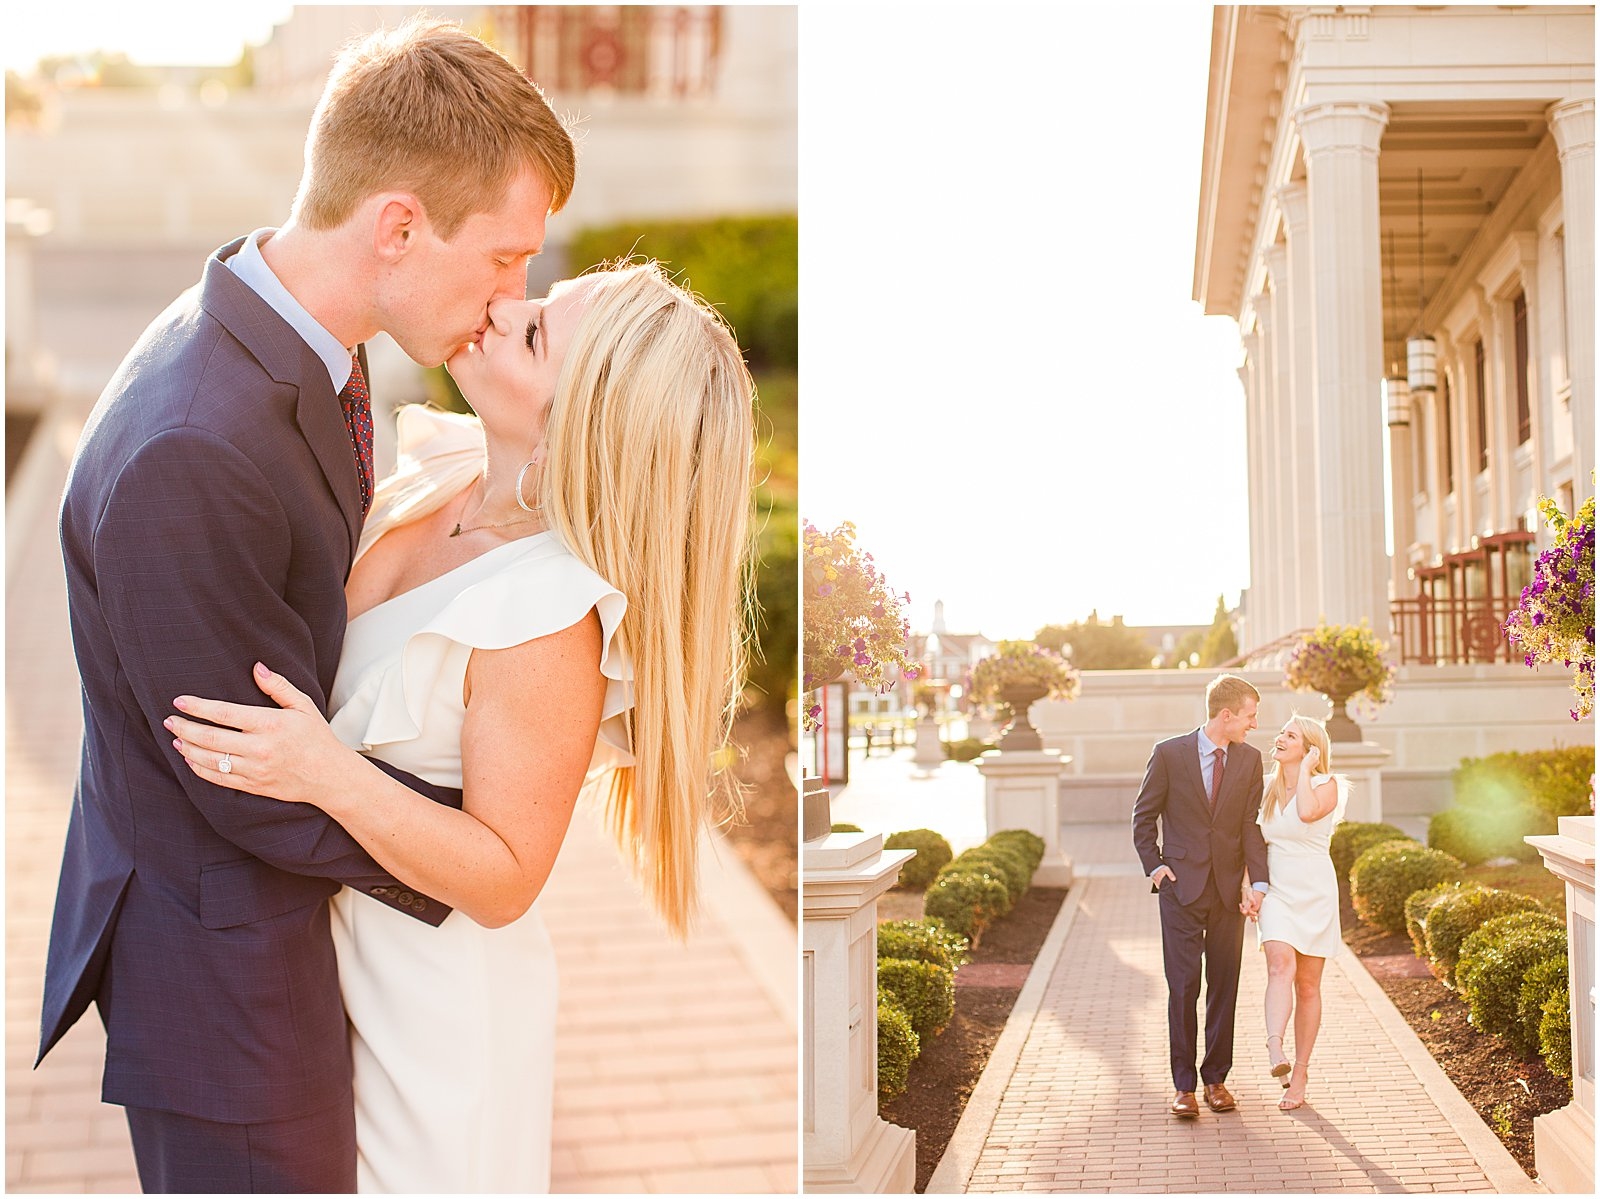 A Cute and Cuddly Engagement Session in Carmel, IN | Abbi and Josh0016.jpg